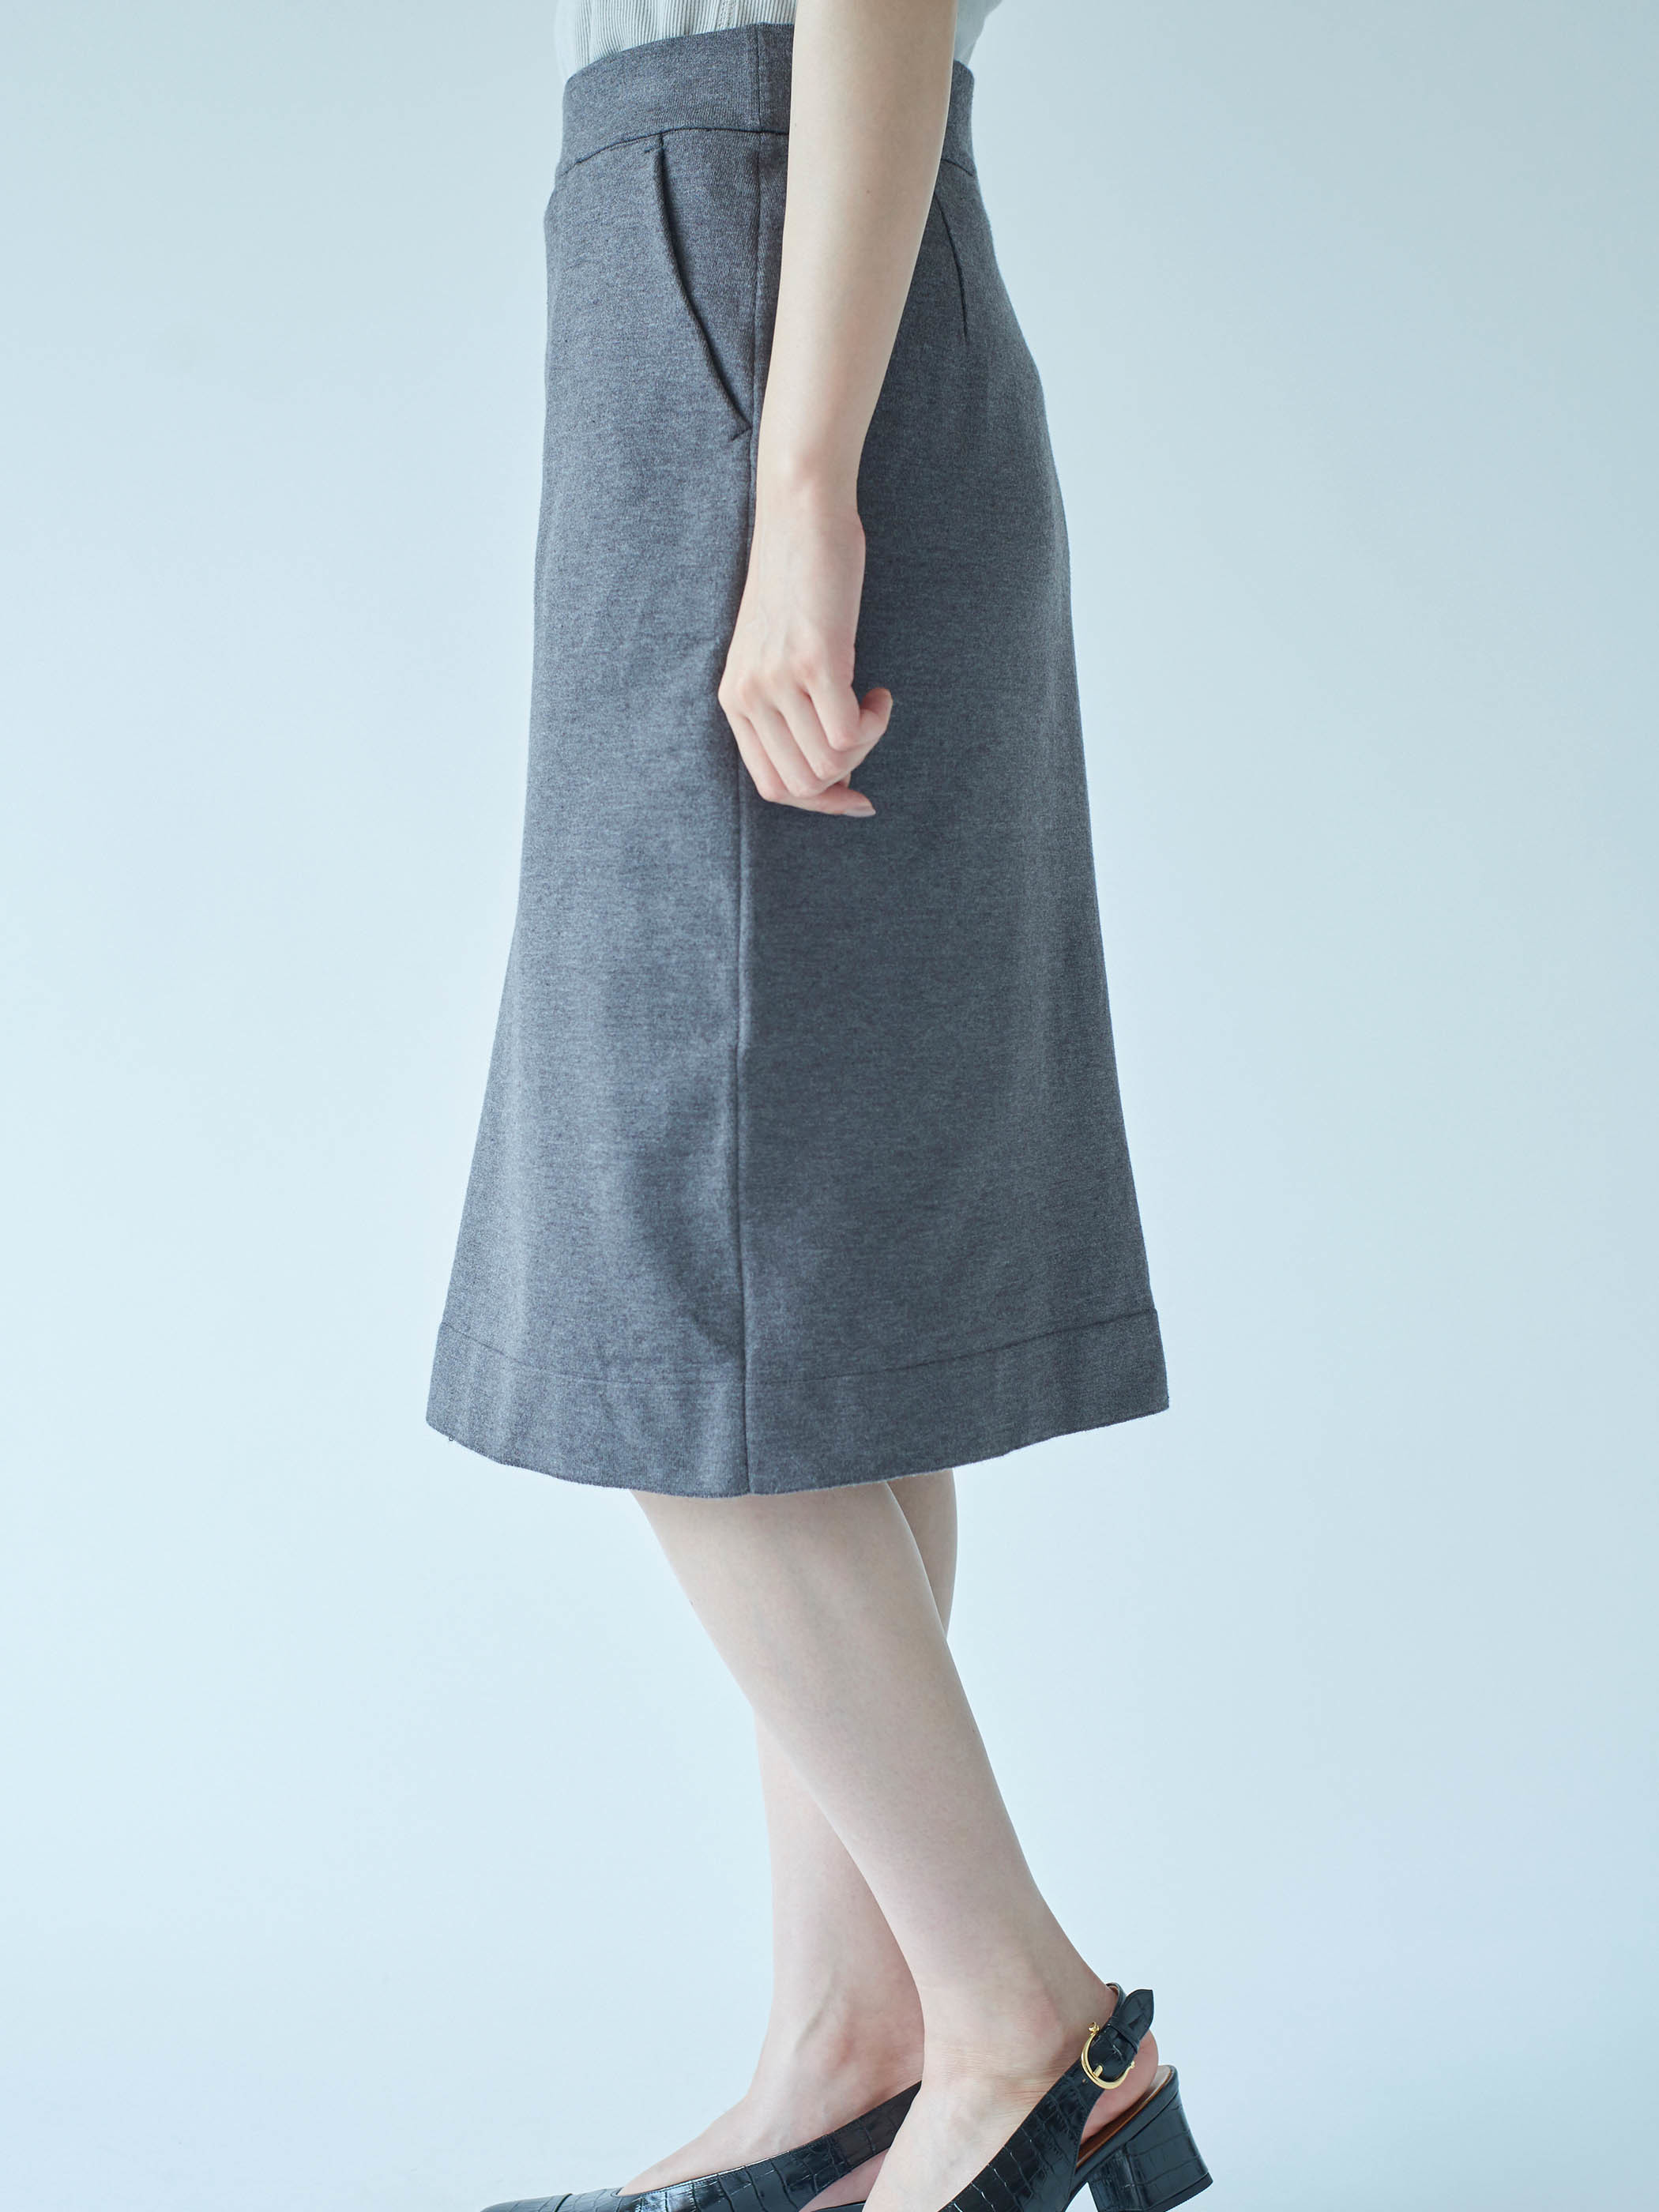 Work Wear collection Women's Tight Skirt Gray (タイトスカート・グレー)